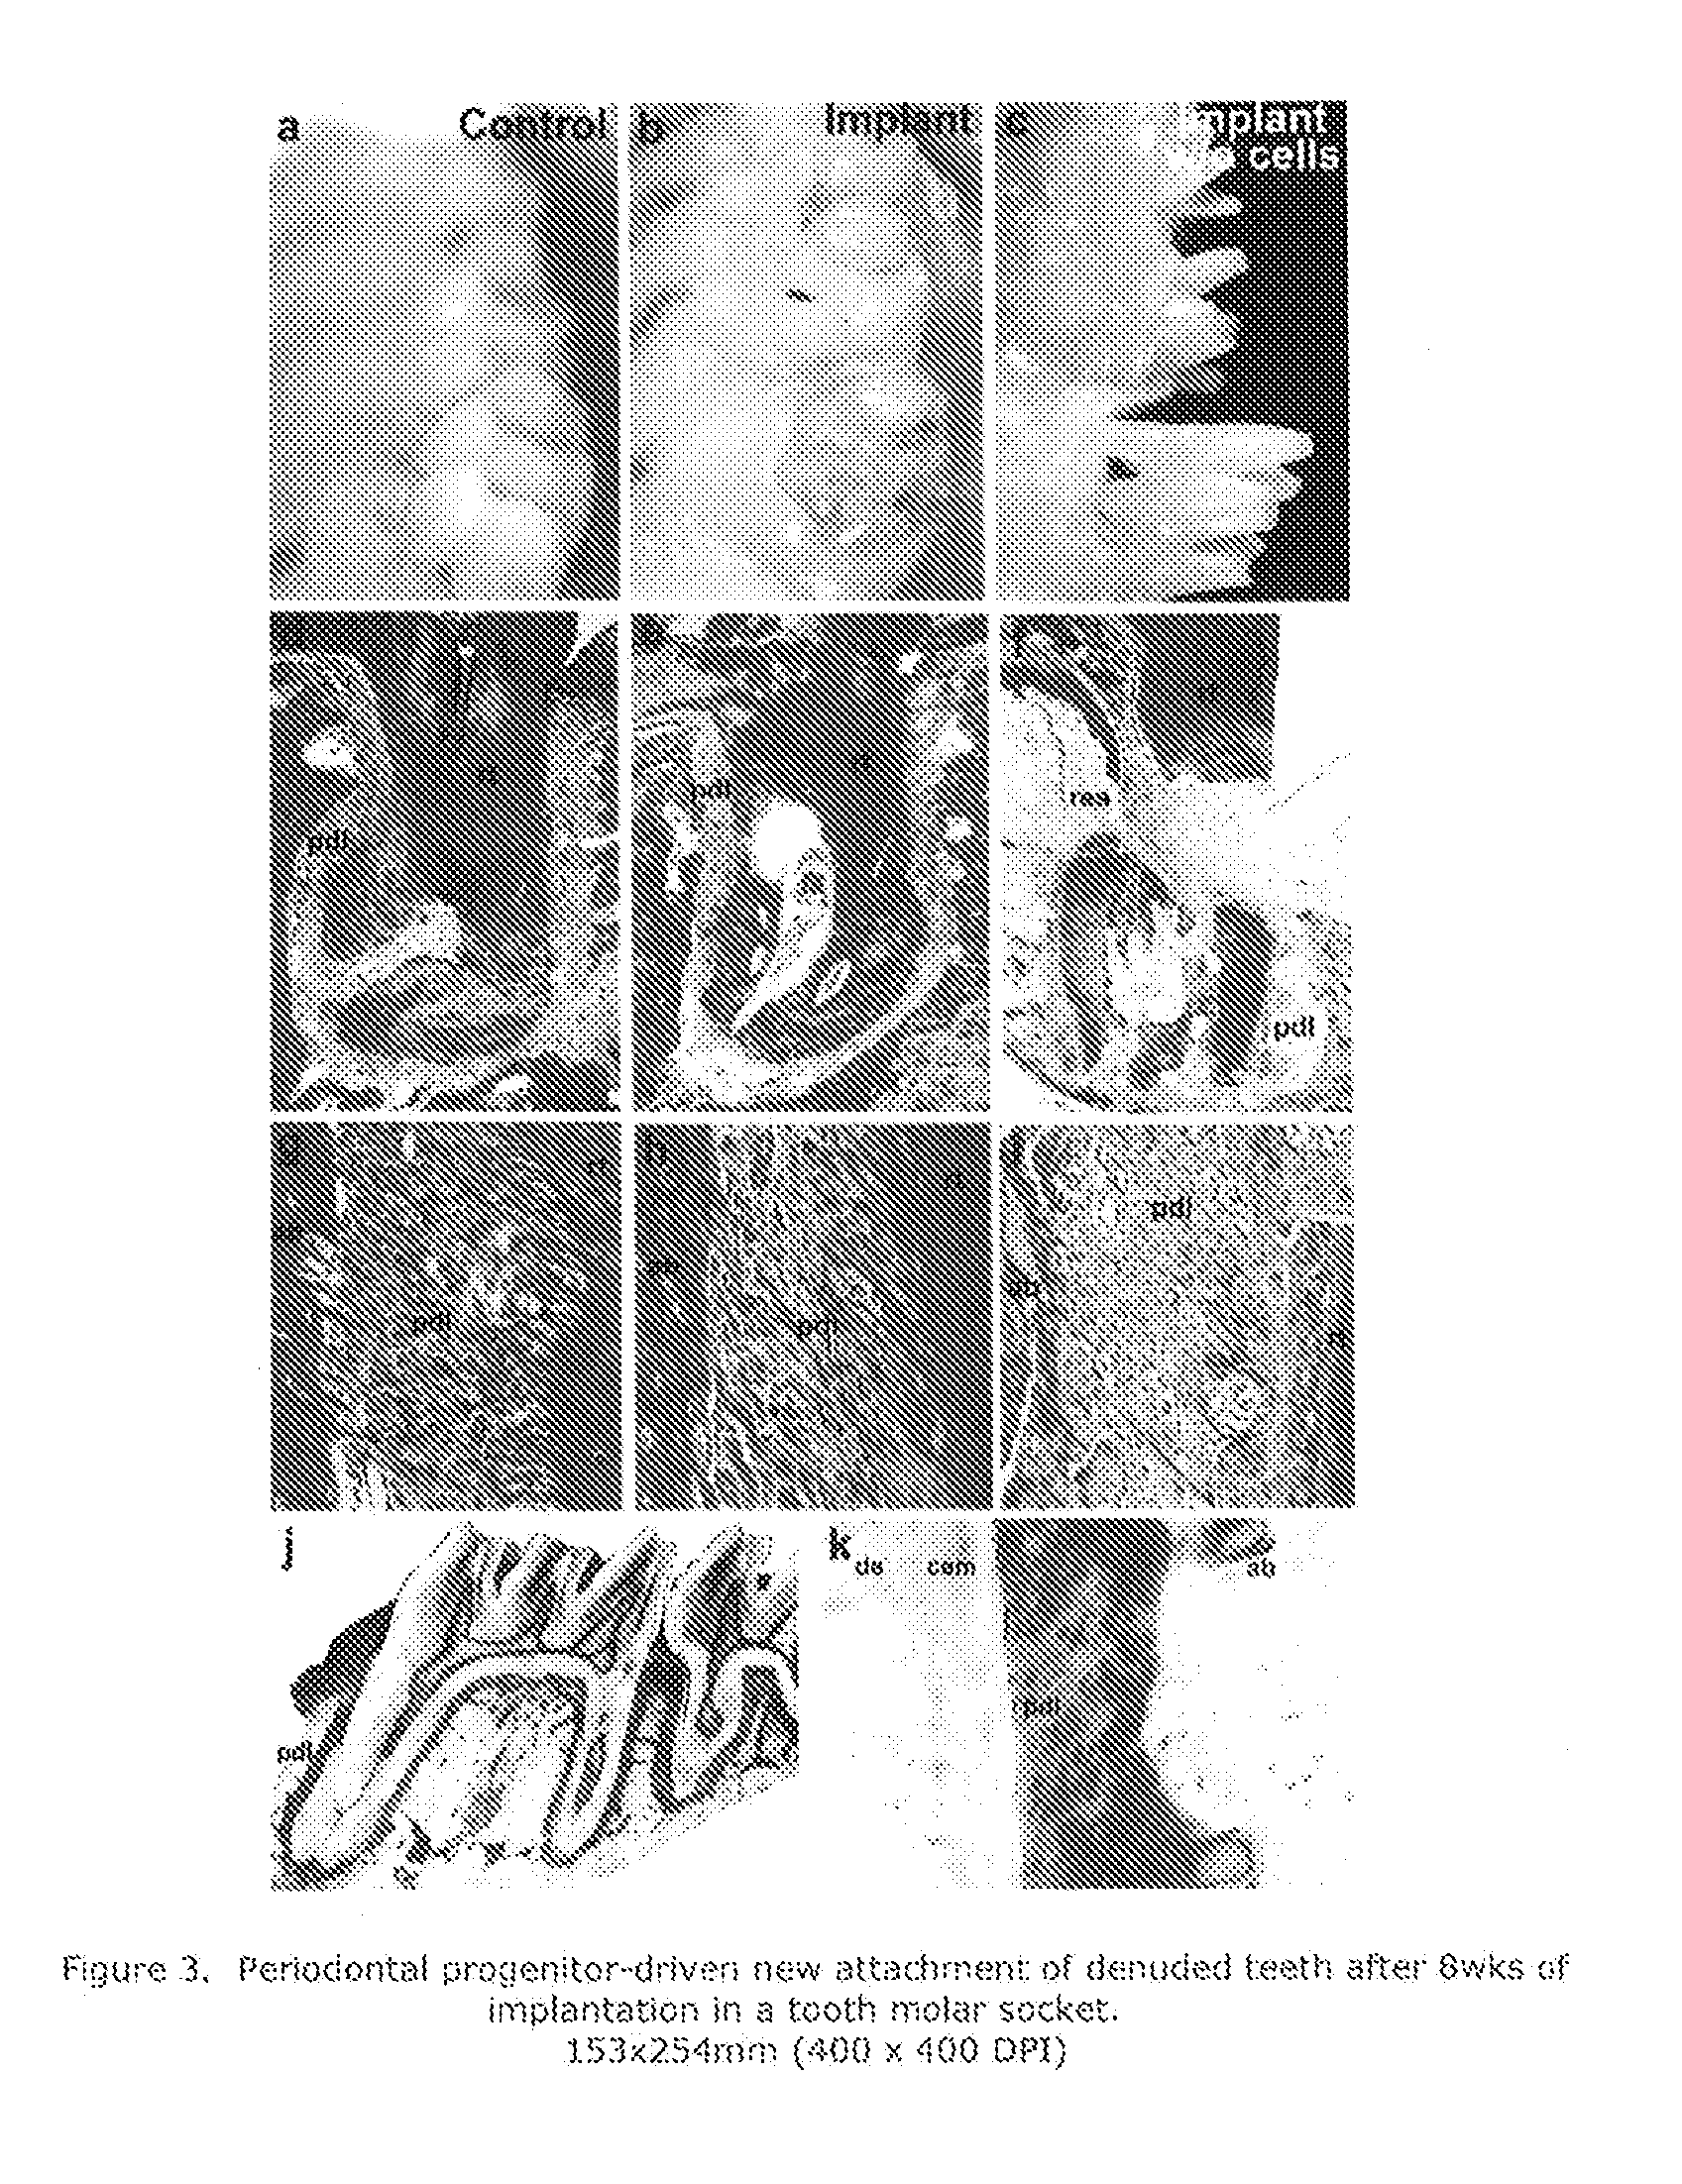 Reagents and methods for preparing teeth for implantation